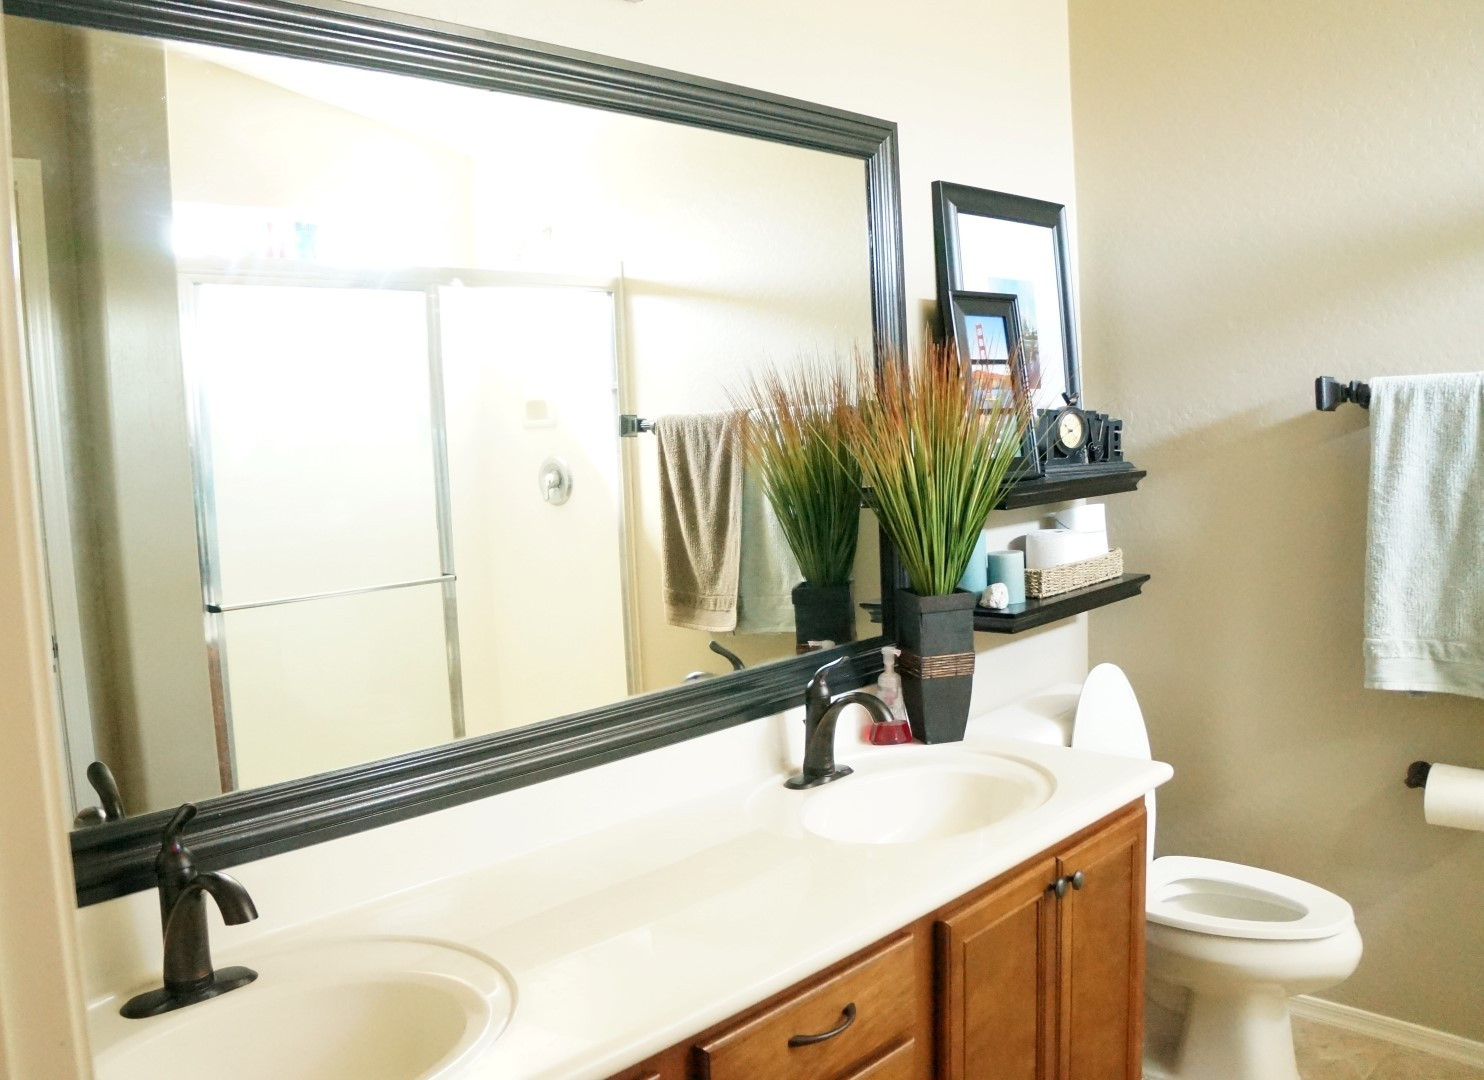 Bathroom Mirrors With Frames
 How to Frame a Mirror DIY Bathroom Mirror Frames